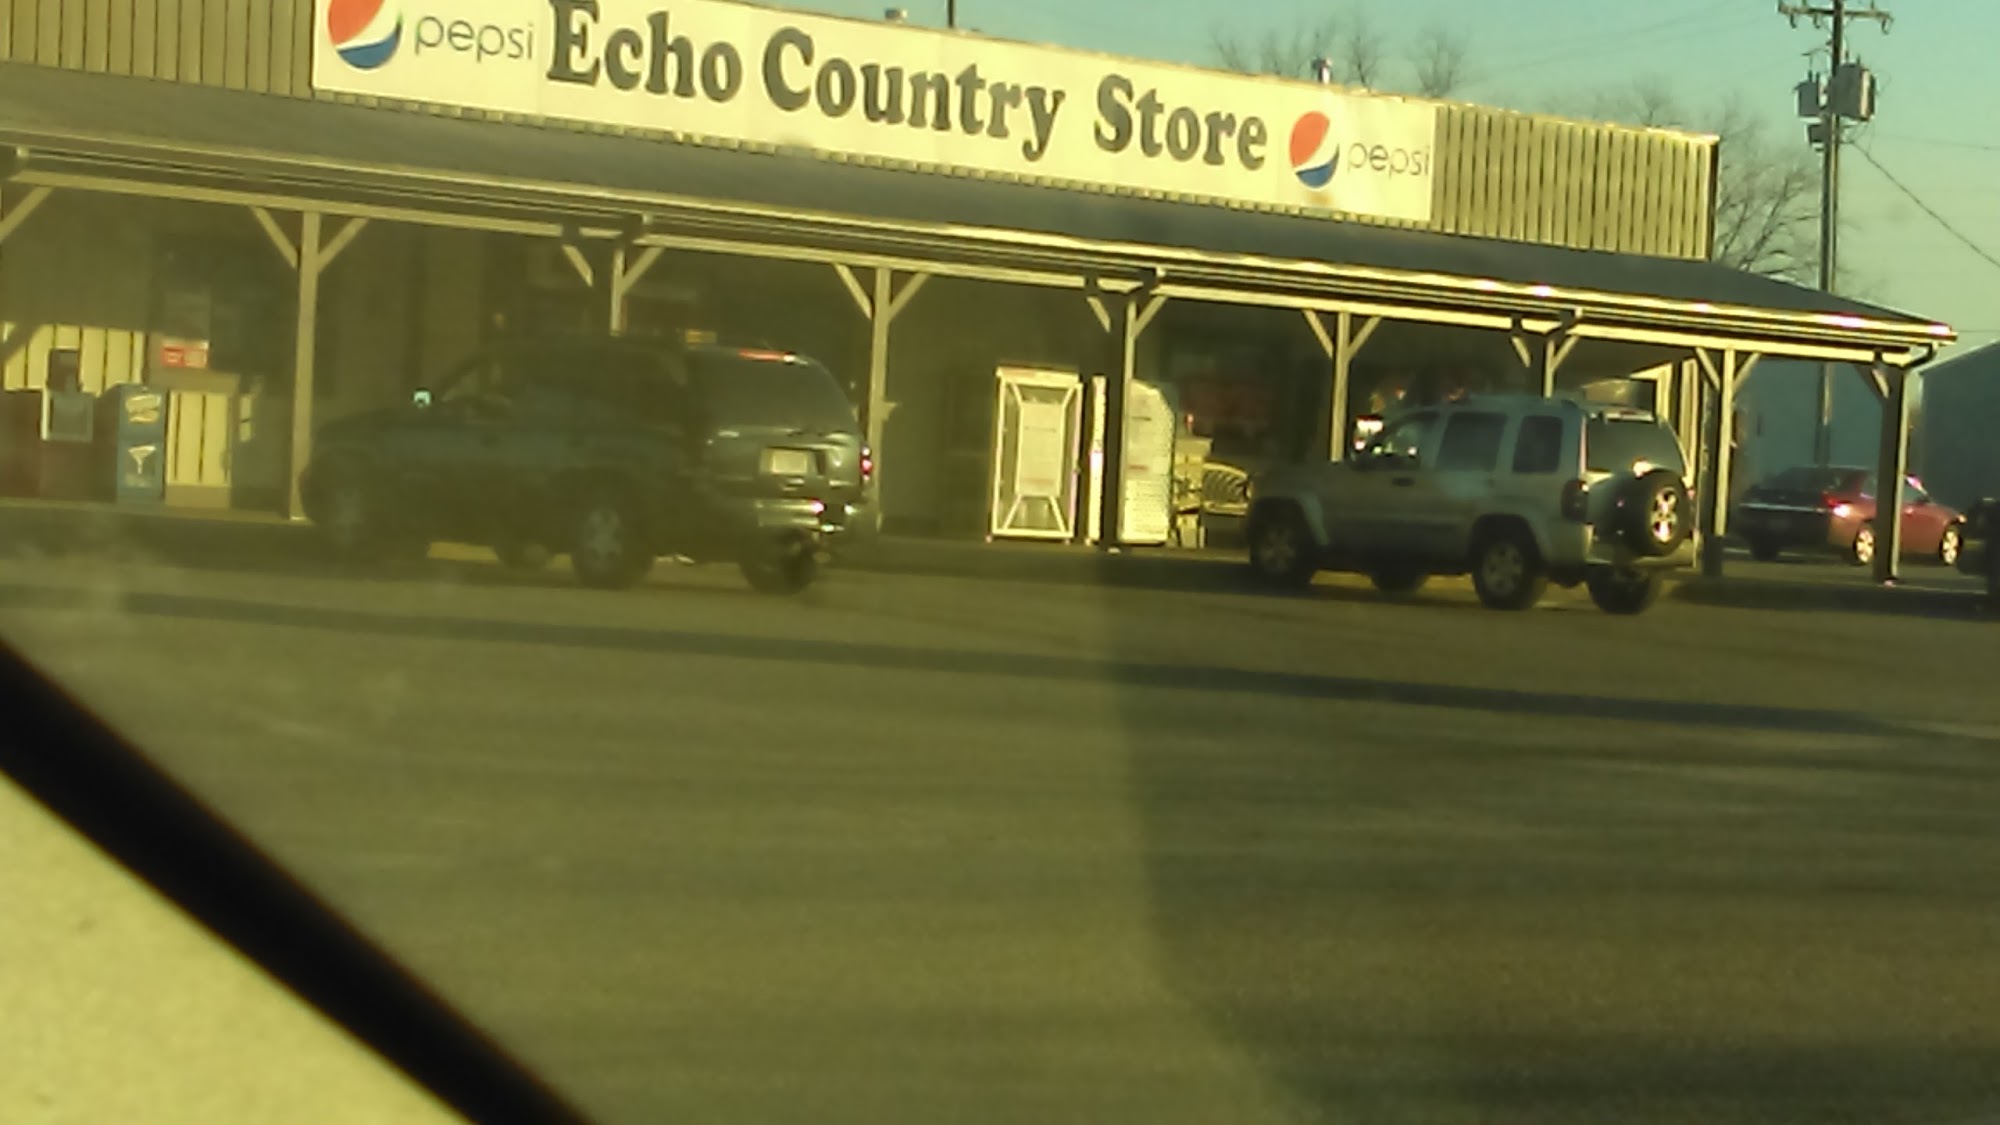 Echo Country Store